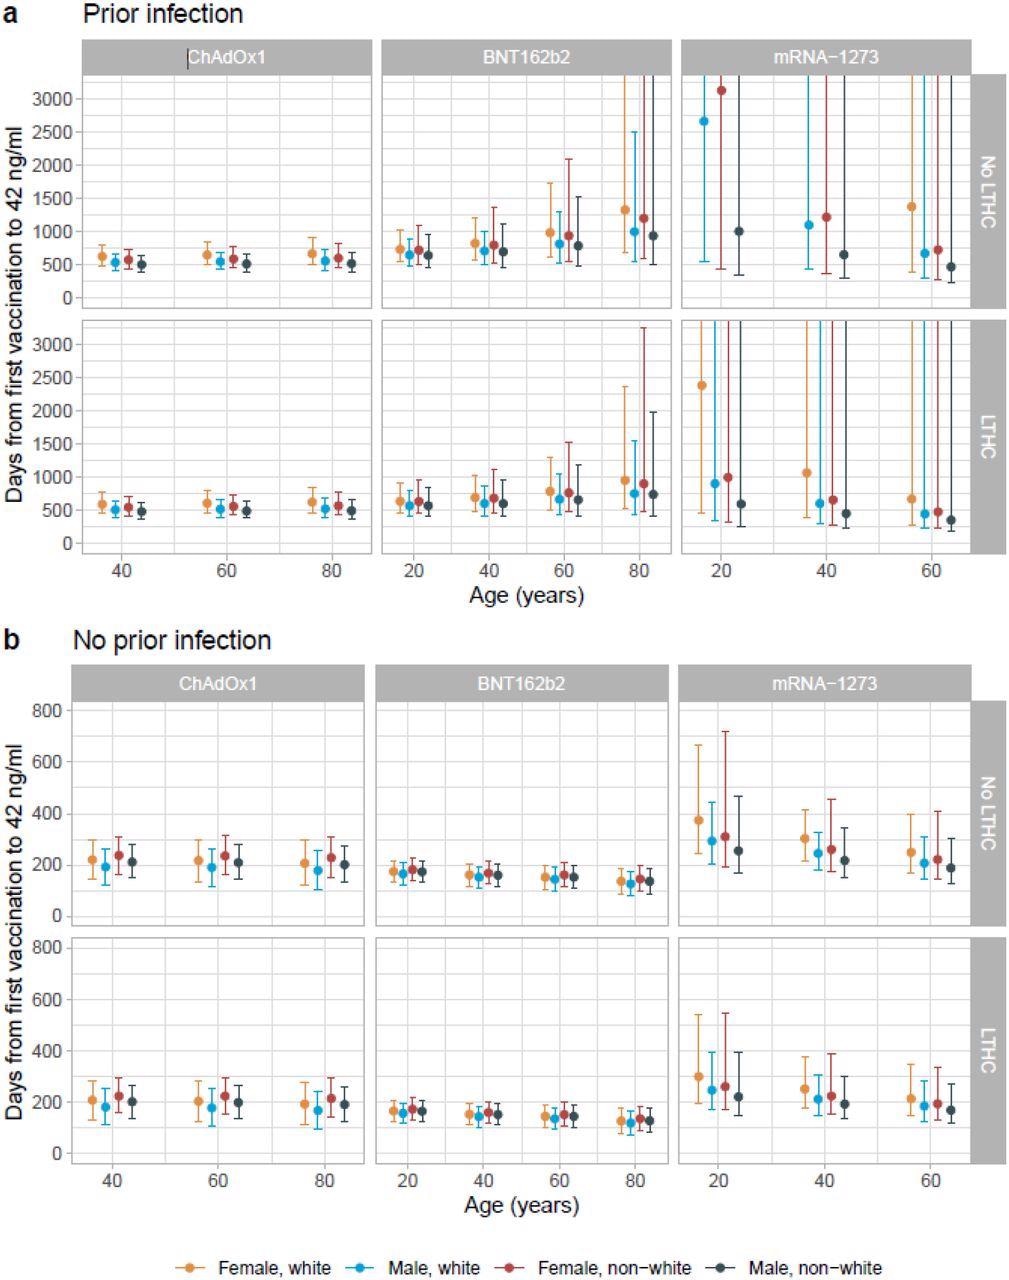 Posterior predicted days (95% credible interval) from the first vaccination to the positivity threshold of 42 ng/ml in those with evidence of prior infection (panel a) and without evidence of prior infection (panel b). Estimates were separated by age, sex, ethnicity, long-term health condition (LTHC), and vaccine type. The y-axis is truncated at 3,000 days (panel a) for visualisation. For ChAdOx1, the 20-year-old group is not plotted because the vast majority of those receiving ChAdOx1 were ≥40 years. For mRNA-1273, the 80-year-old is not plotted because the vast majority of those receiving mRNA-1273 were ≤60 years. In panel a, 20 and 40-year-old white female without LTHC is not plotted in mRNA-1273 because their antibody levels were not estimated to decline so no duration could be estimated. Equivalent estimates after second vaccination are provided in.